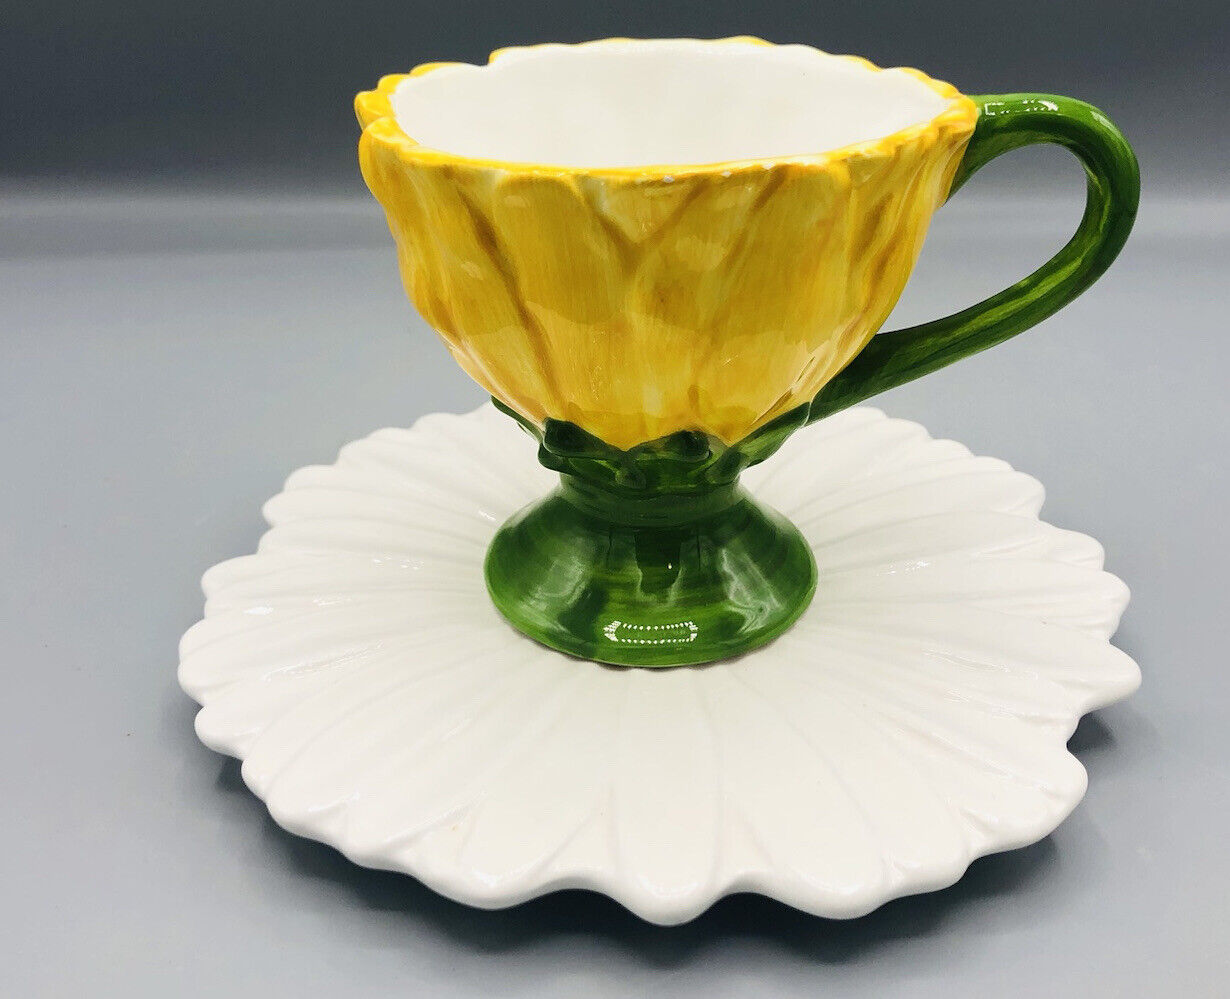 Teleflora Daisy Tea Cup and Saucer Set Yellow White Ceramic Flower